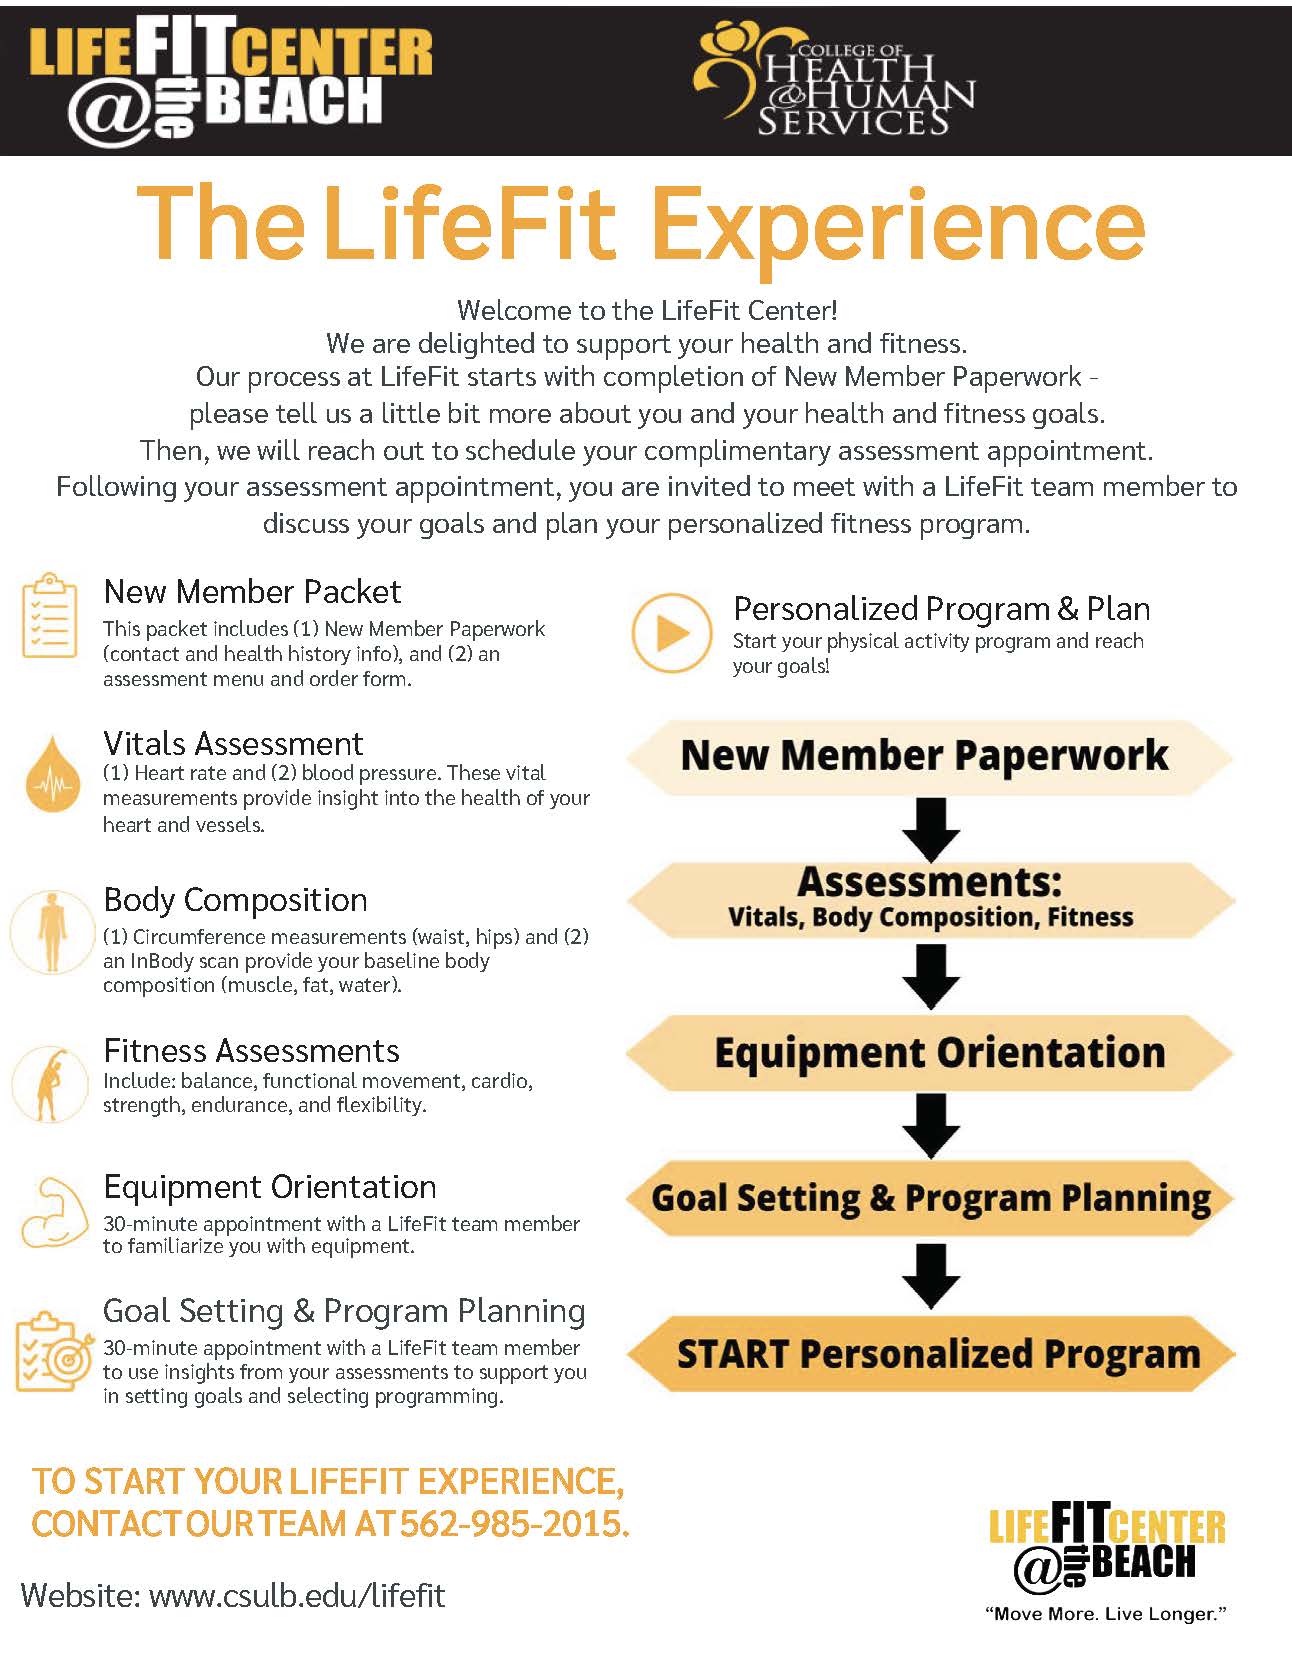 The LifeFit Experience